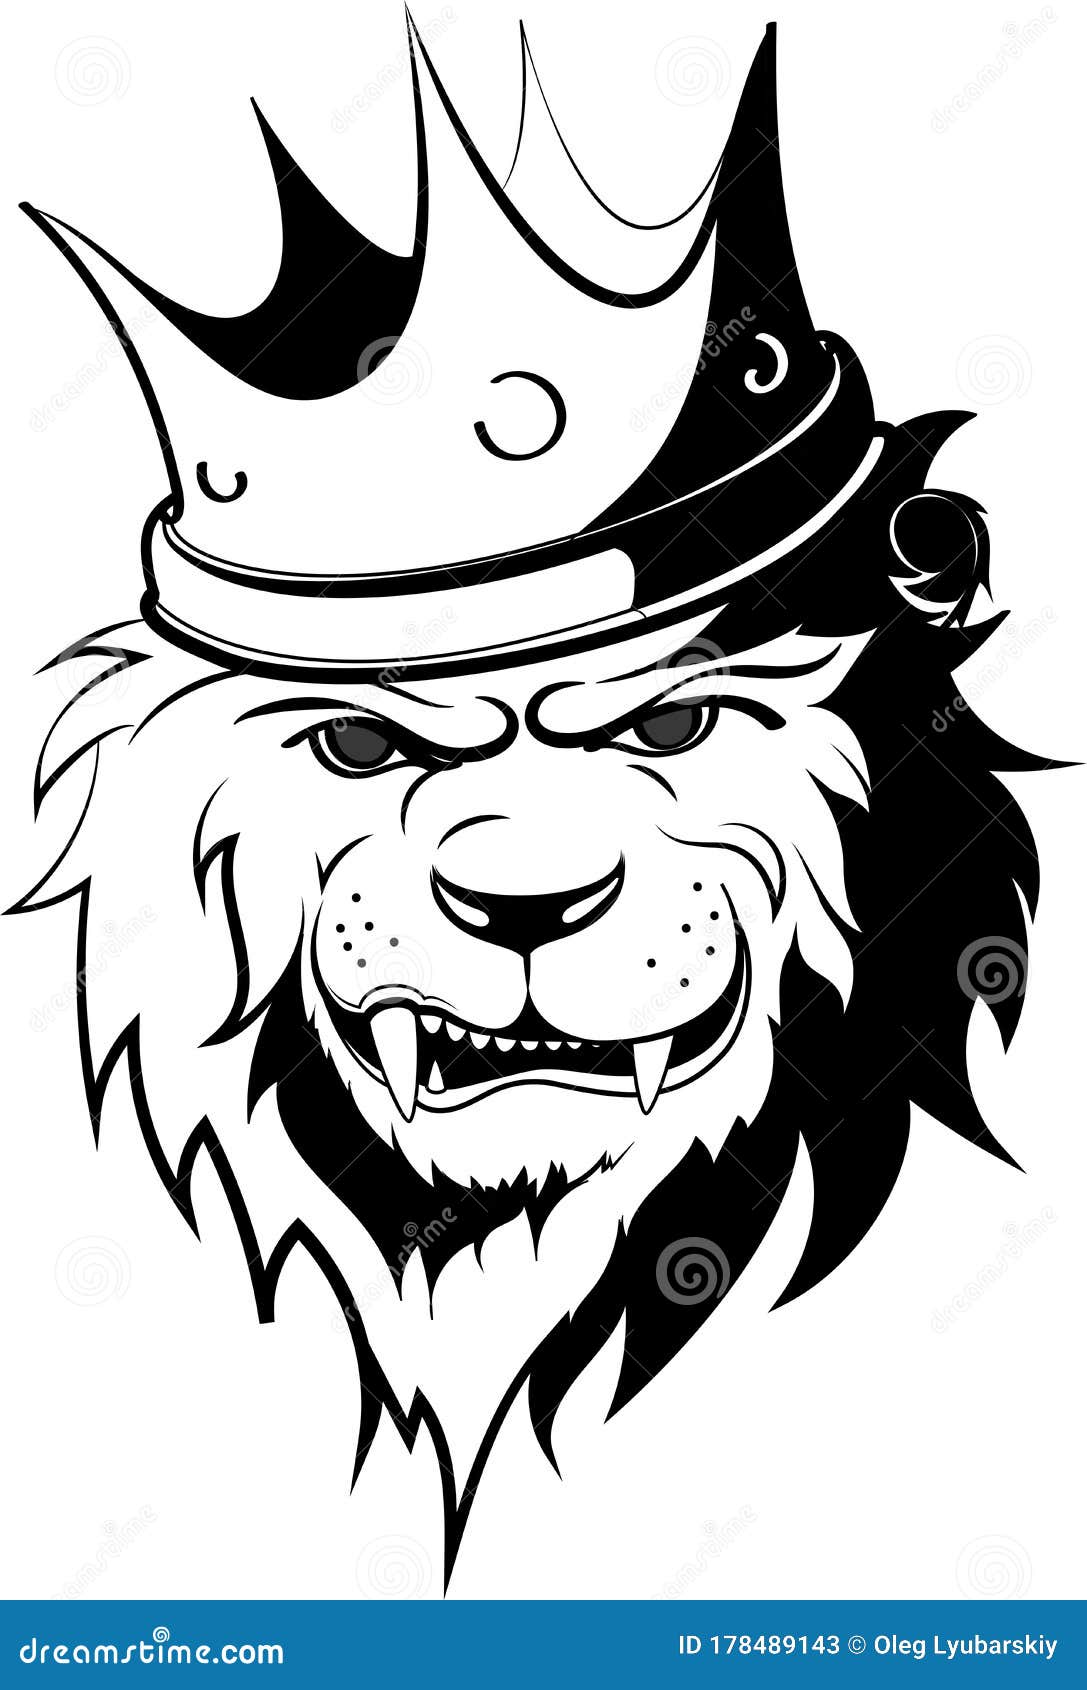 Learn 90+ about king lion tattoo super cool .vn